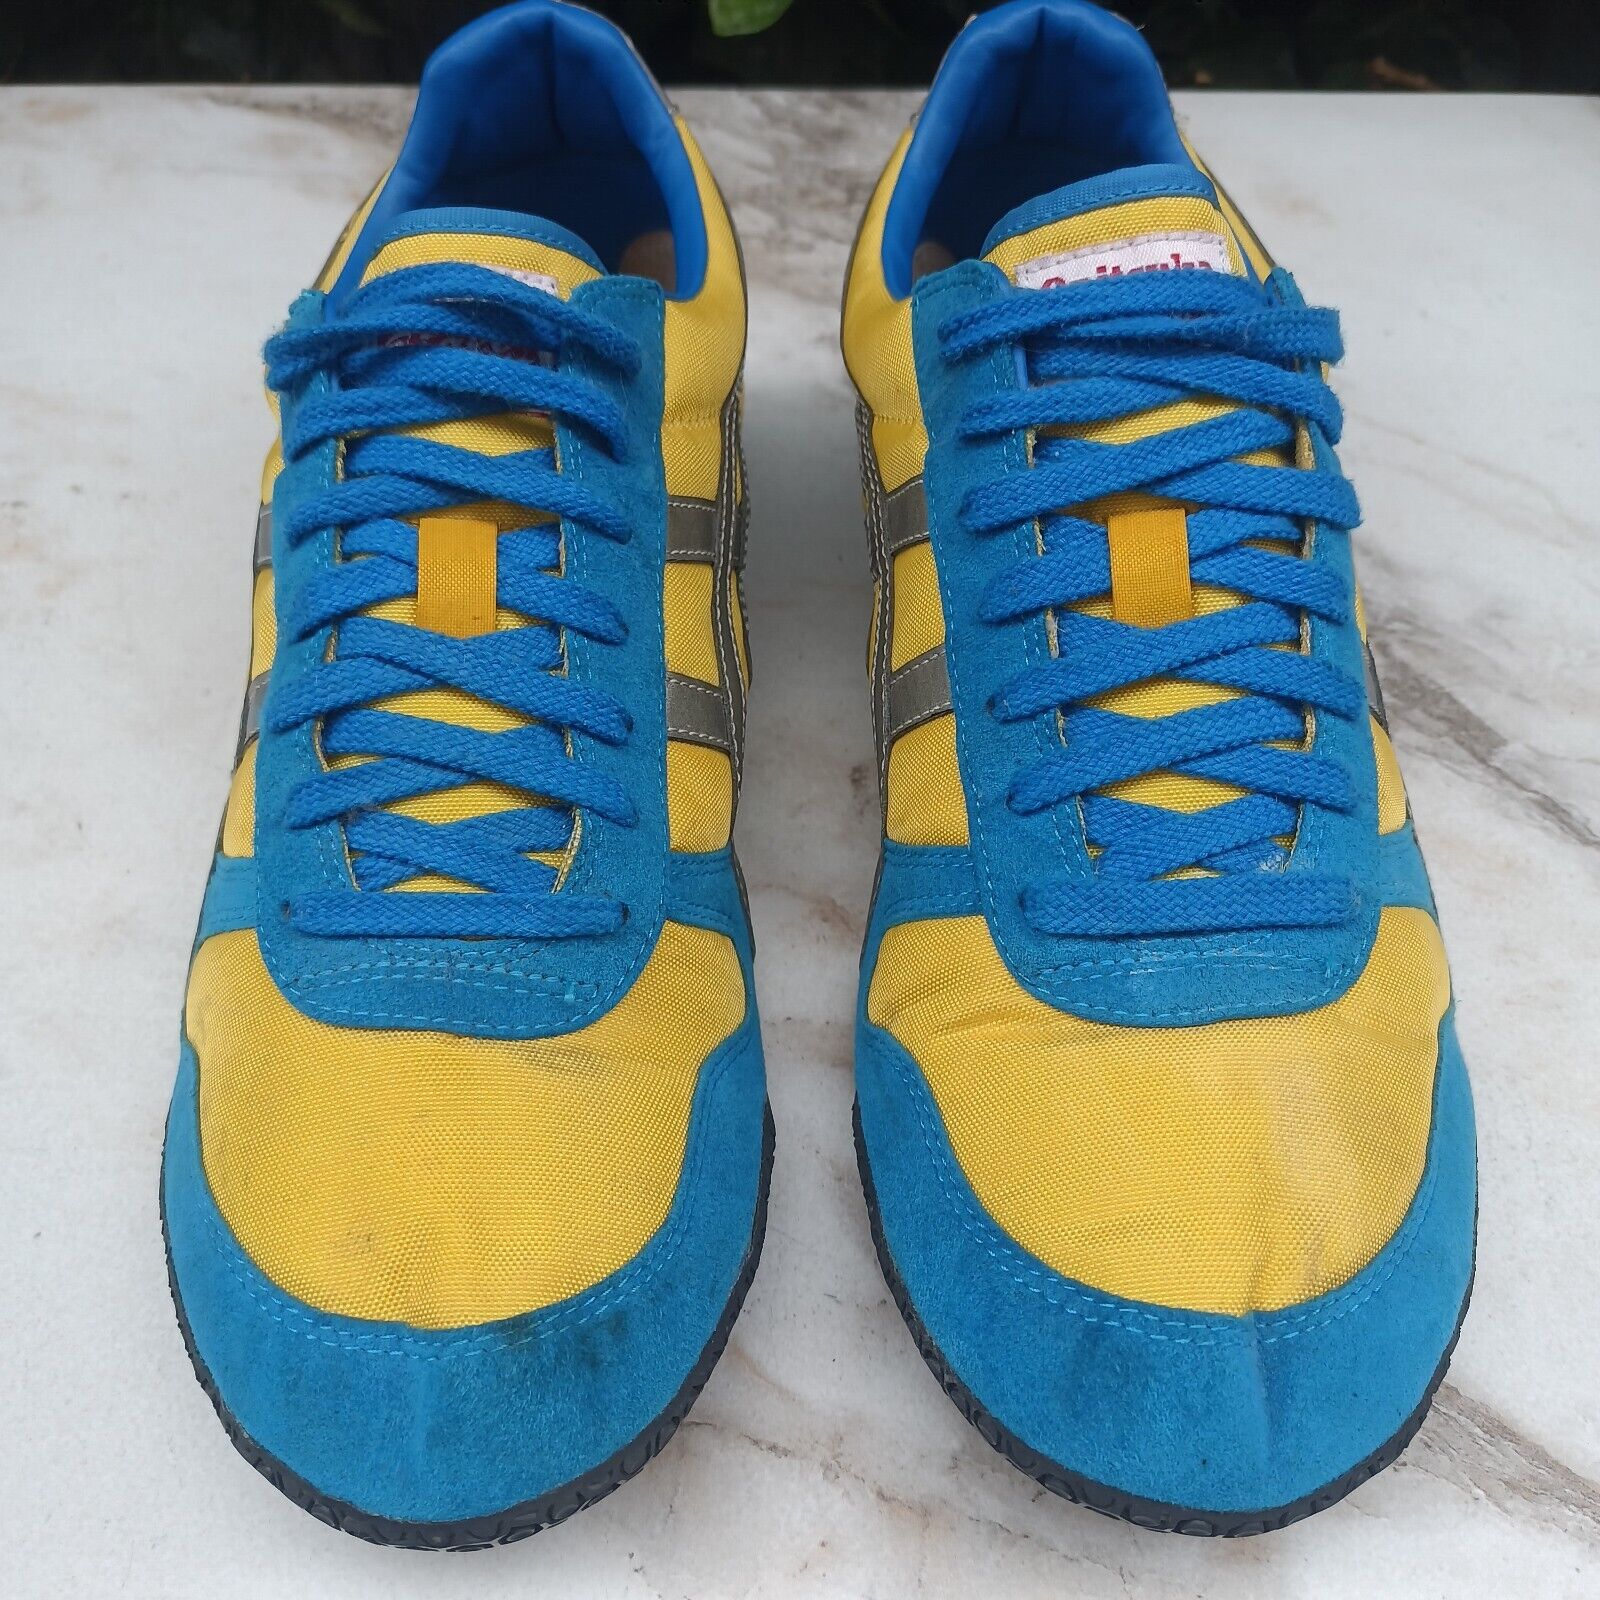 Asics Onitsuka Tiger Ultimate 81  Sneakers Blue Yellow Men's Size 11